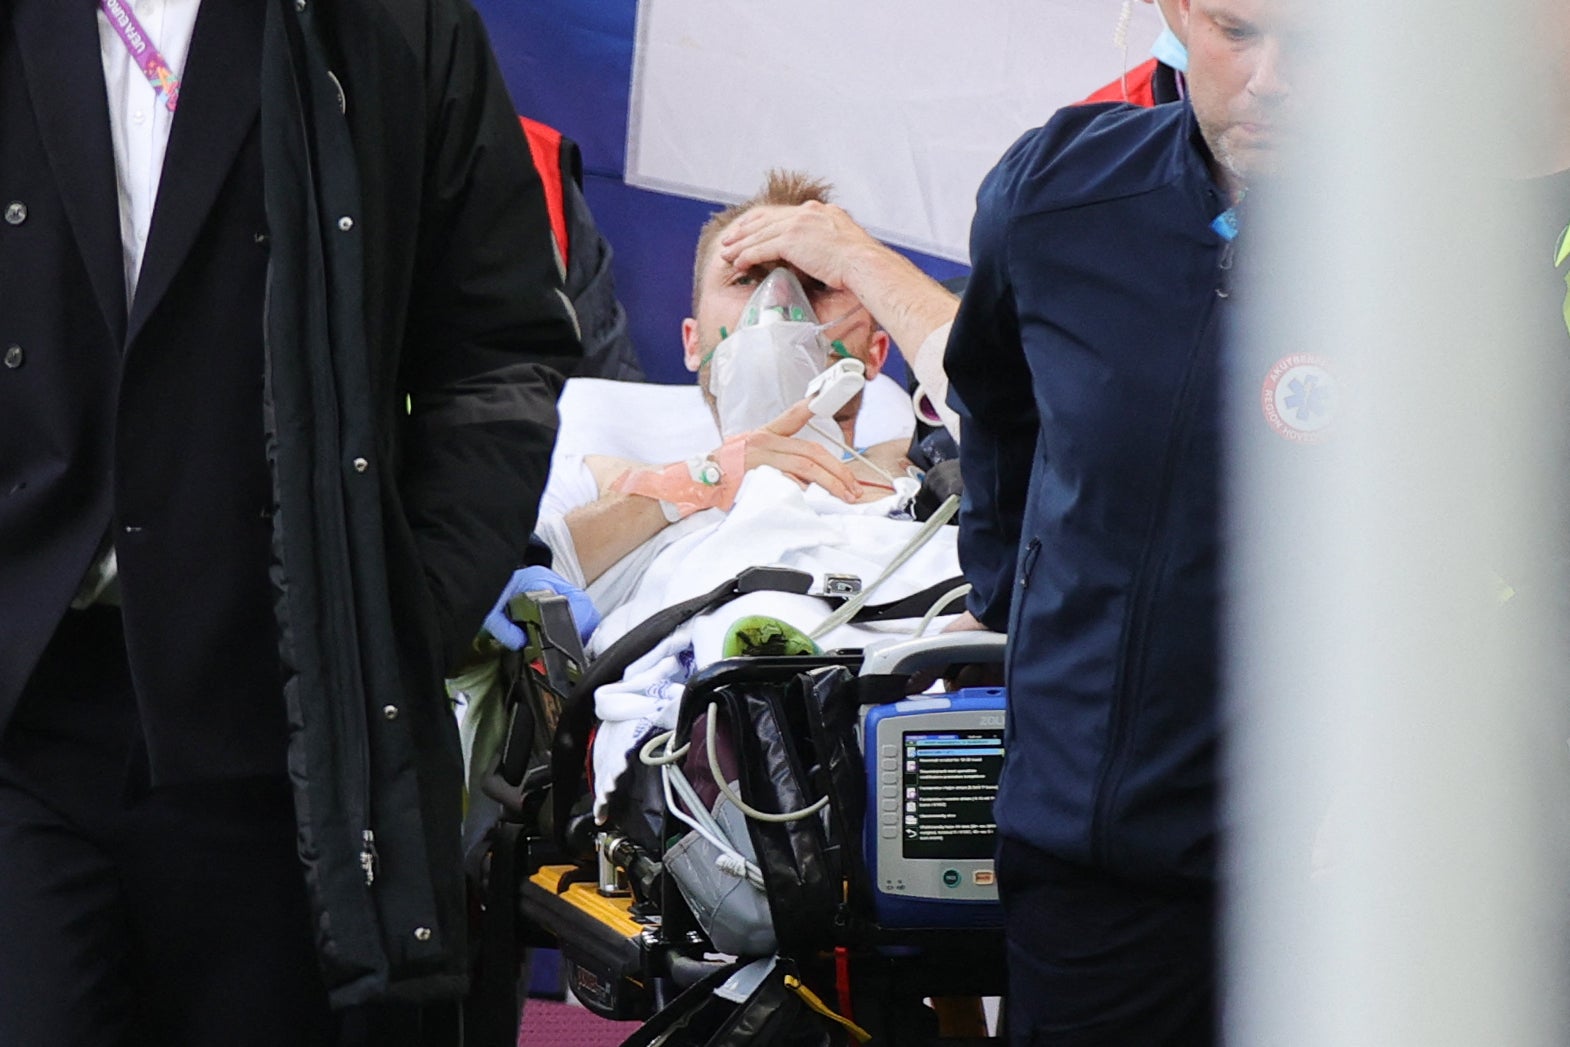 Eriksen regained consciousness before leaving the field